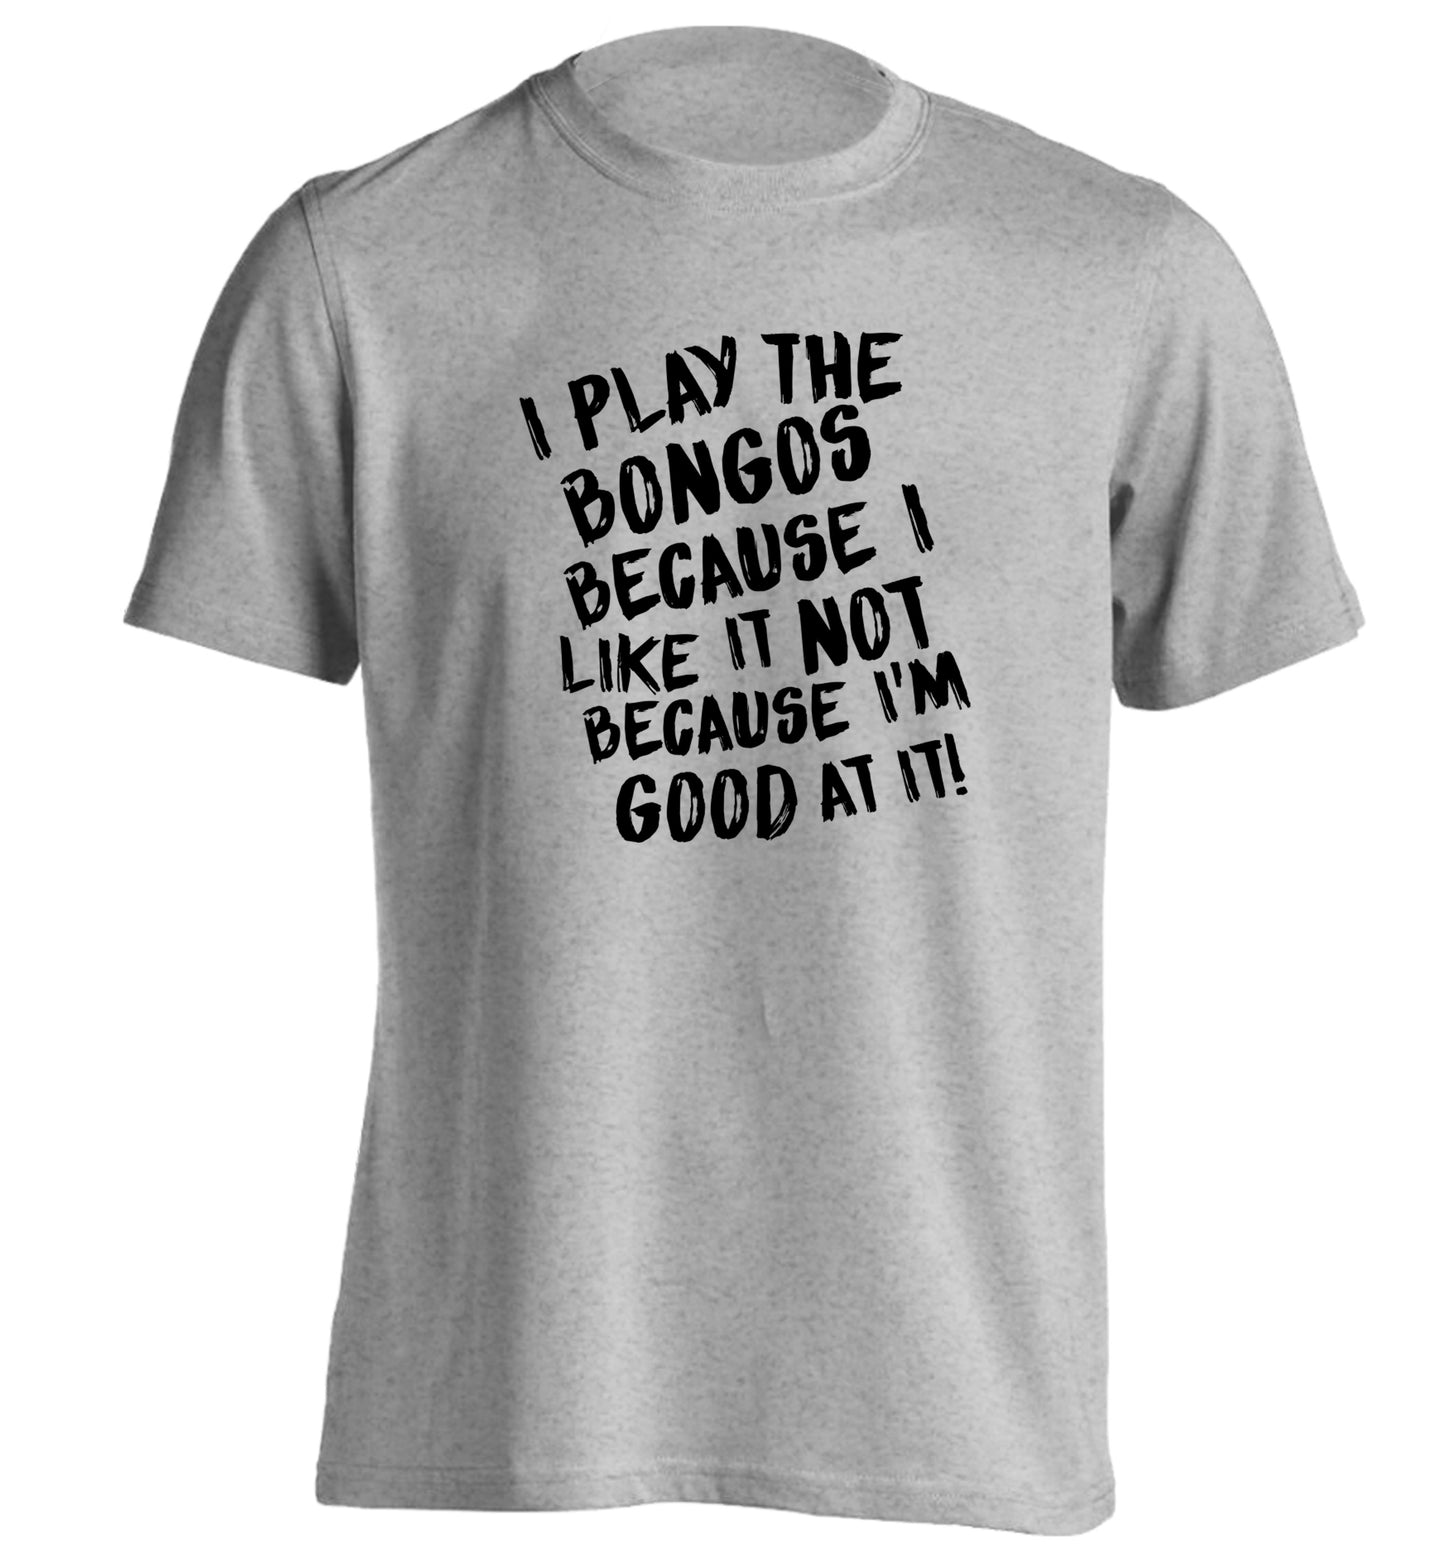 I play the bongos because I like it not because I'm good at it adults unisex grey Tshirt 2XL